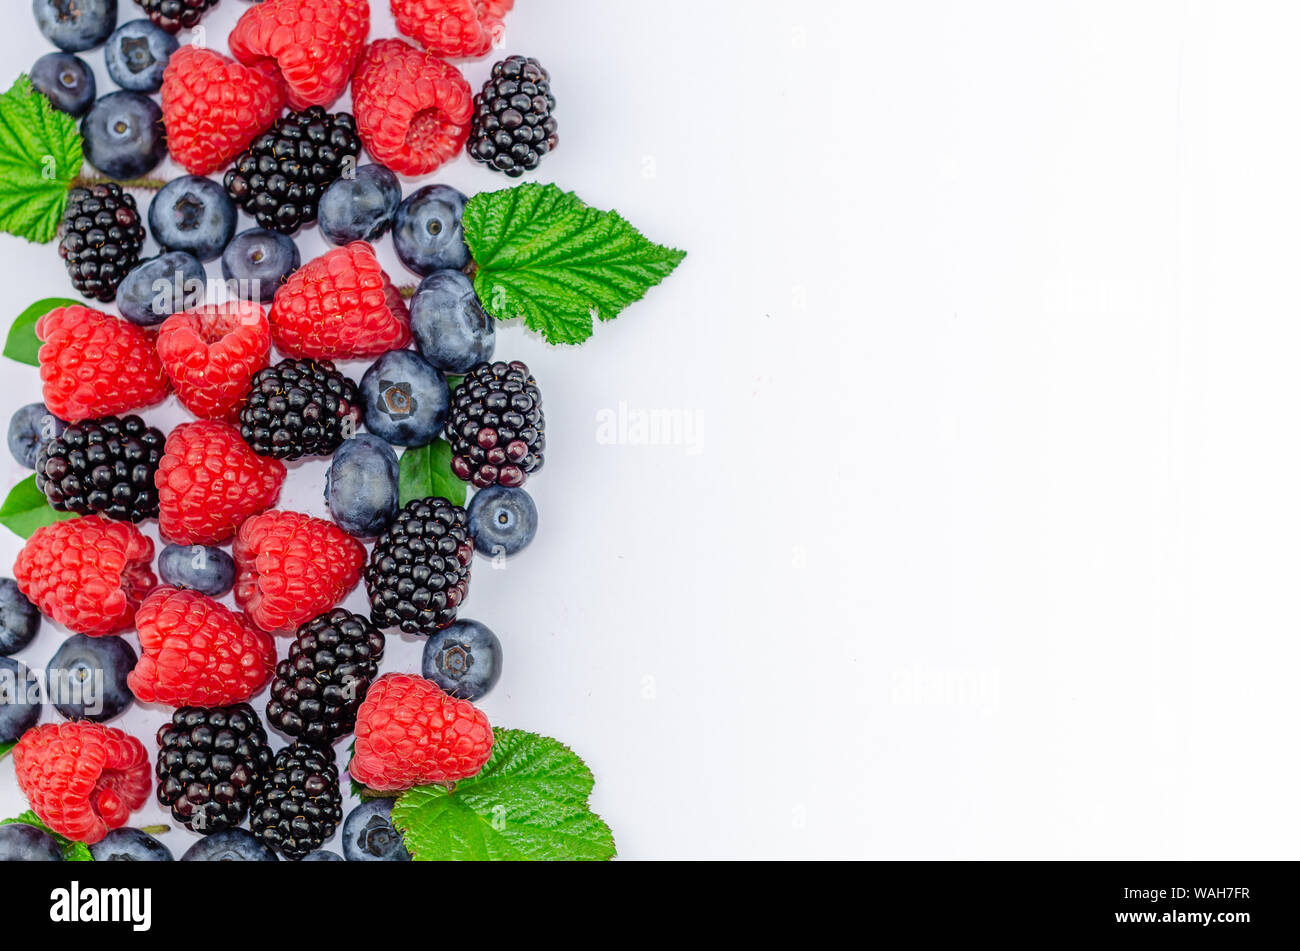 Blueberries, blackberries, raspberries and green leaves isolated on white - flat lay photo with a copy space. Stock Photo